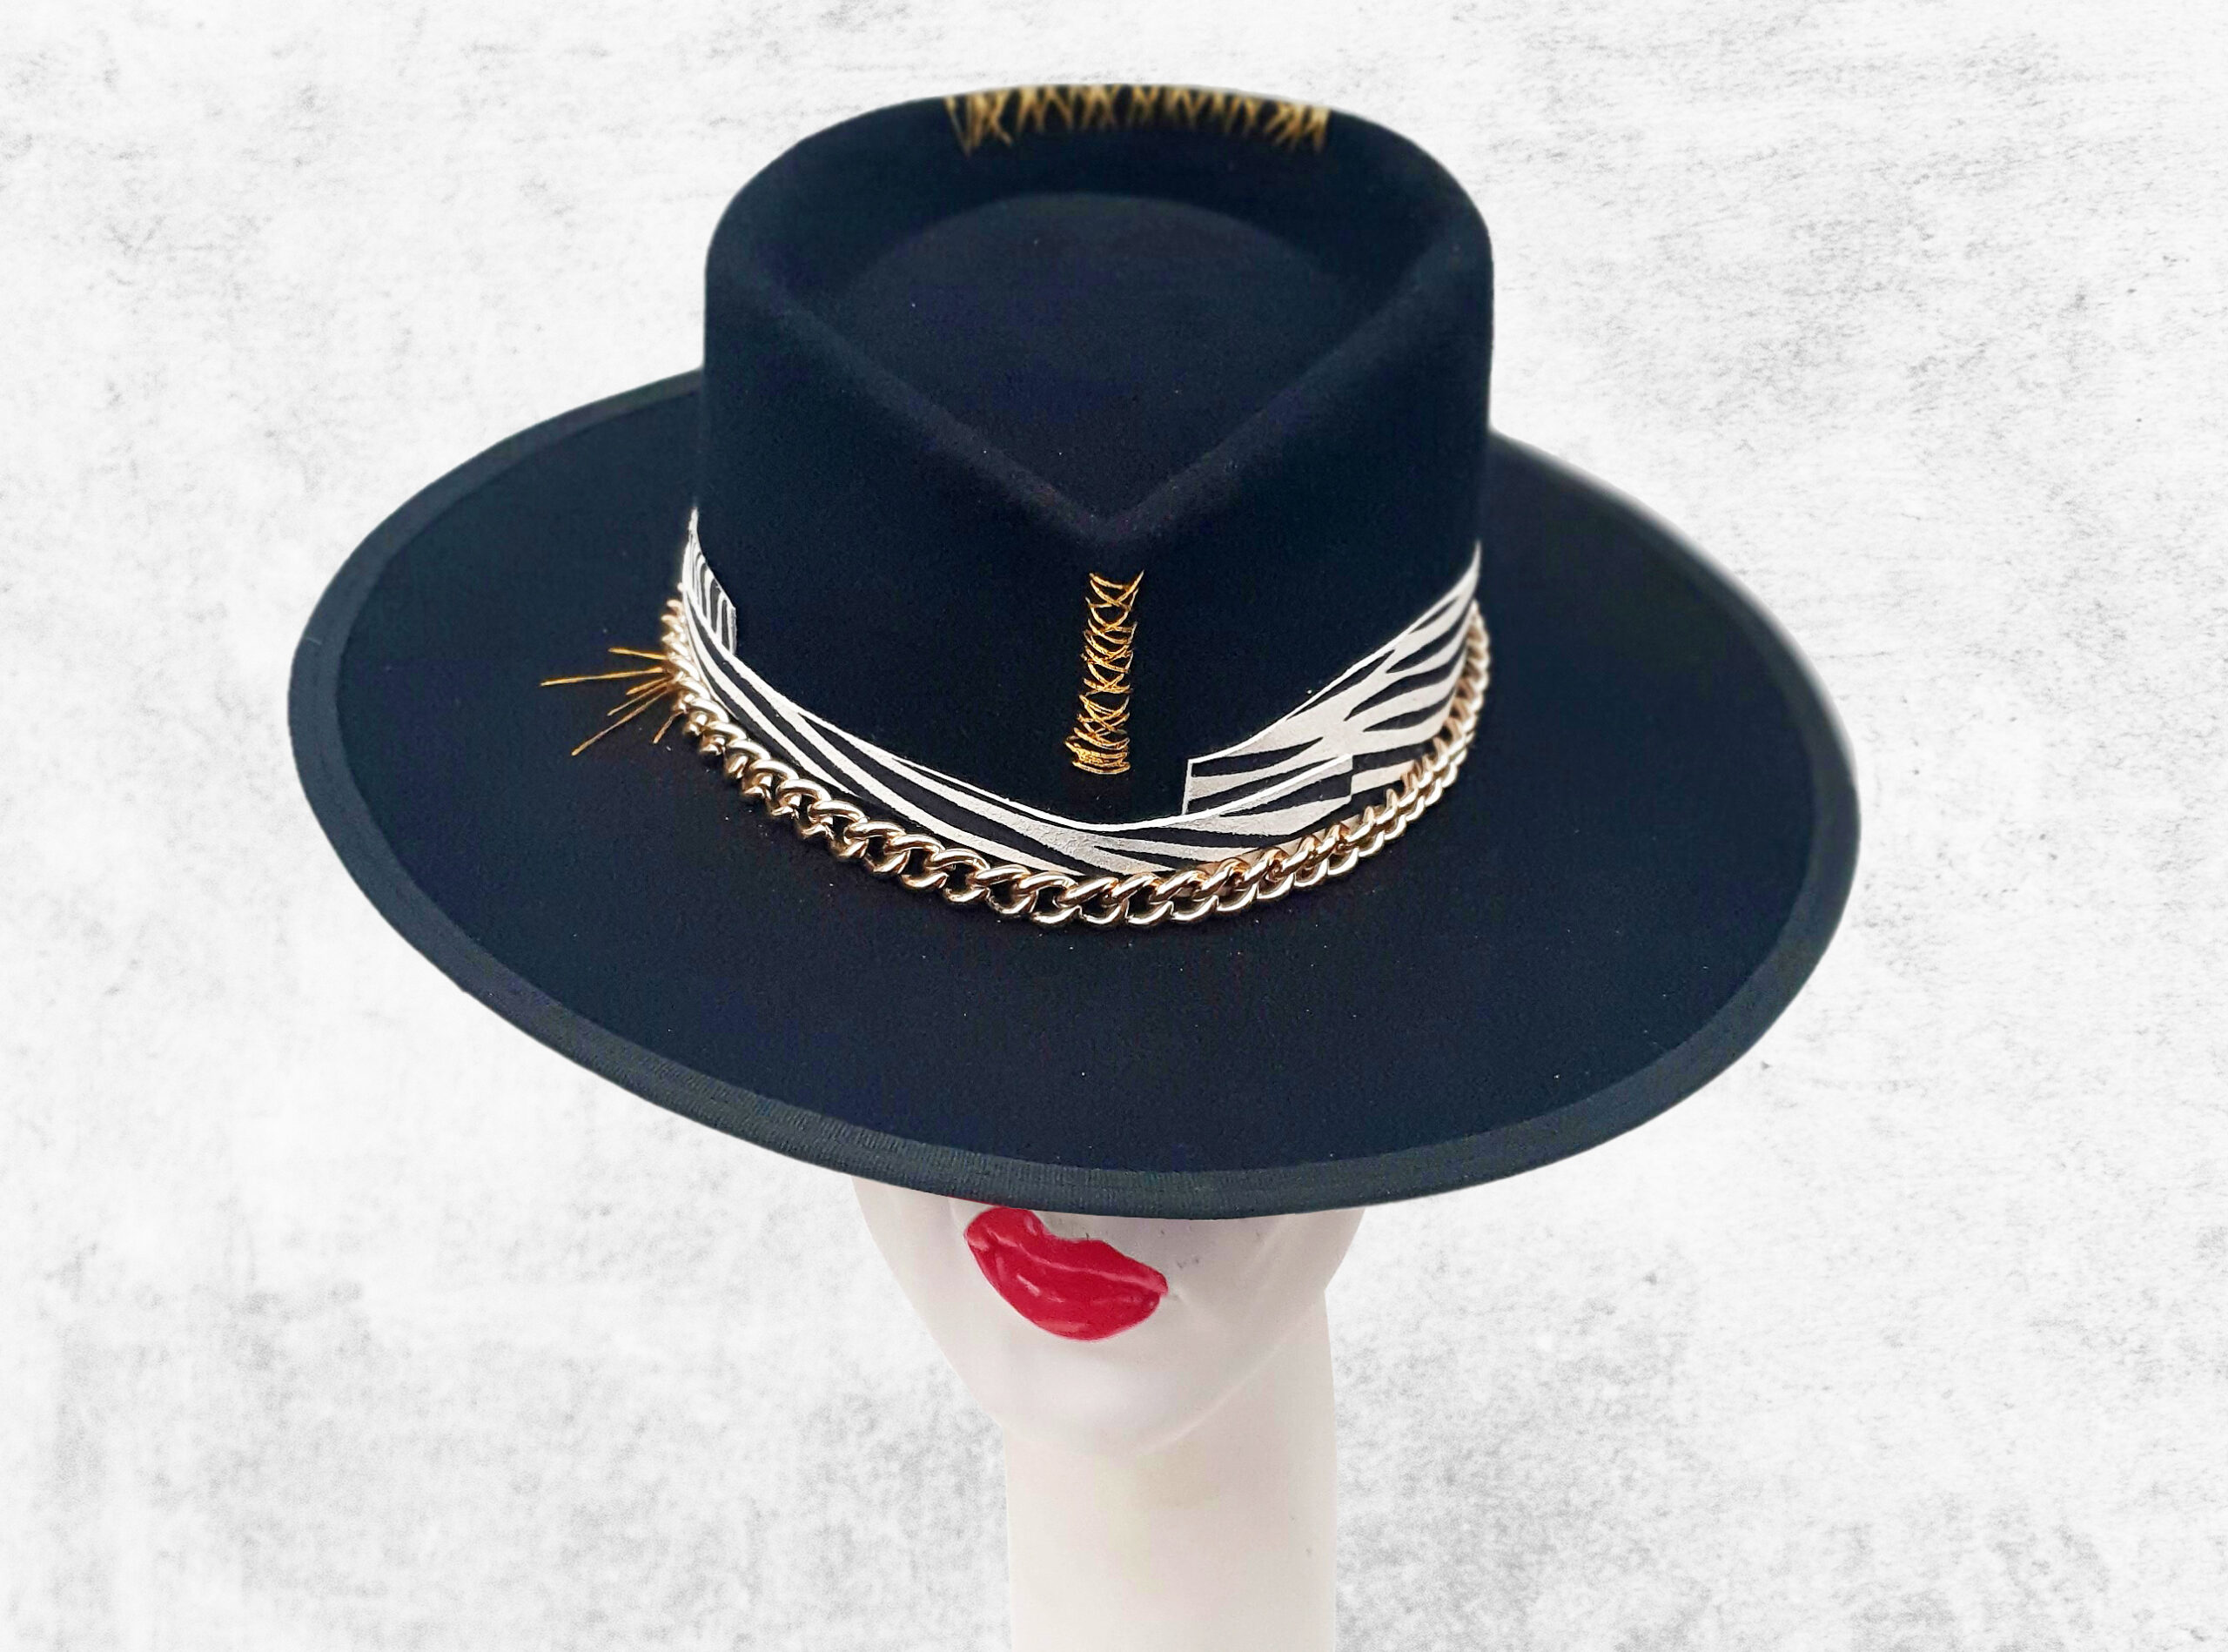 Black wool felt hat - custom handmade- unique model Gold touches, natural leather with black and white zebra details band. Premium Gold chain and gold stitches - all handmade in studio manufactured.